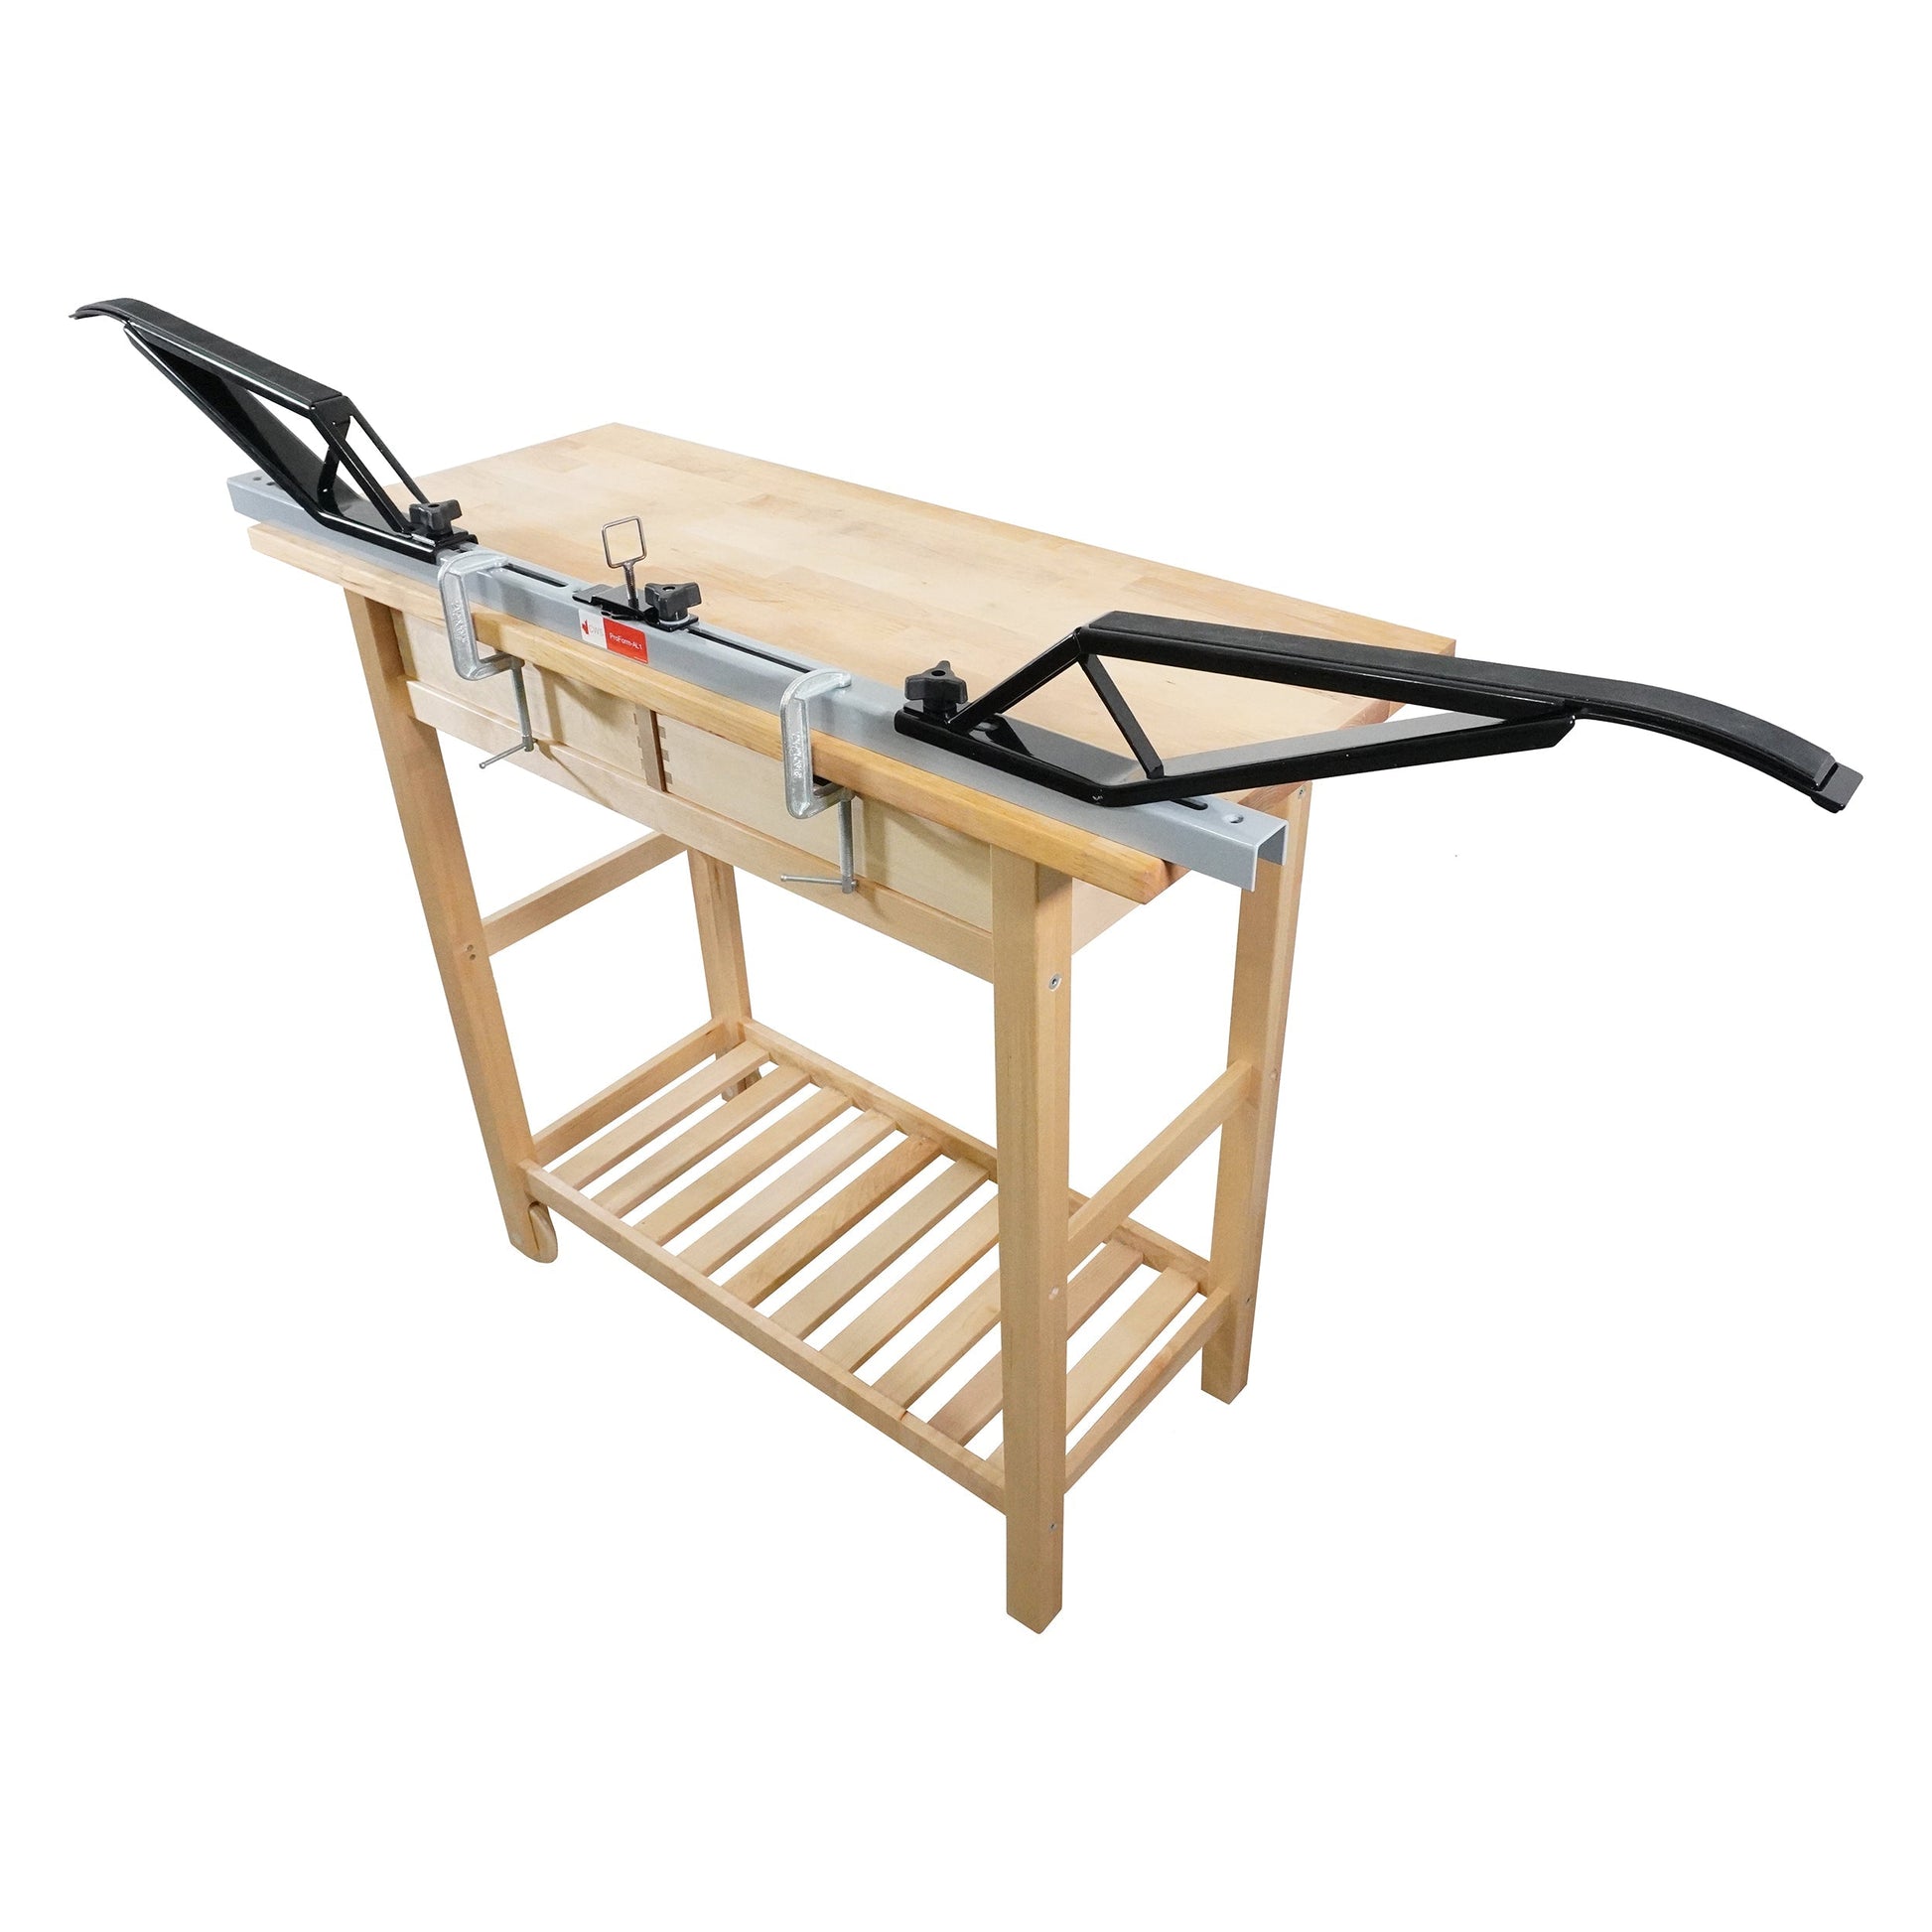 A product picture of the Canadian Wintersports Inc ProForm-AL1 Wax Bench Station Form Segment